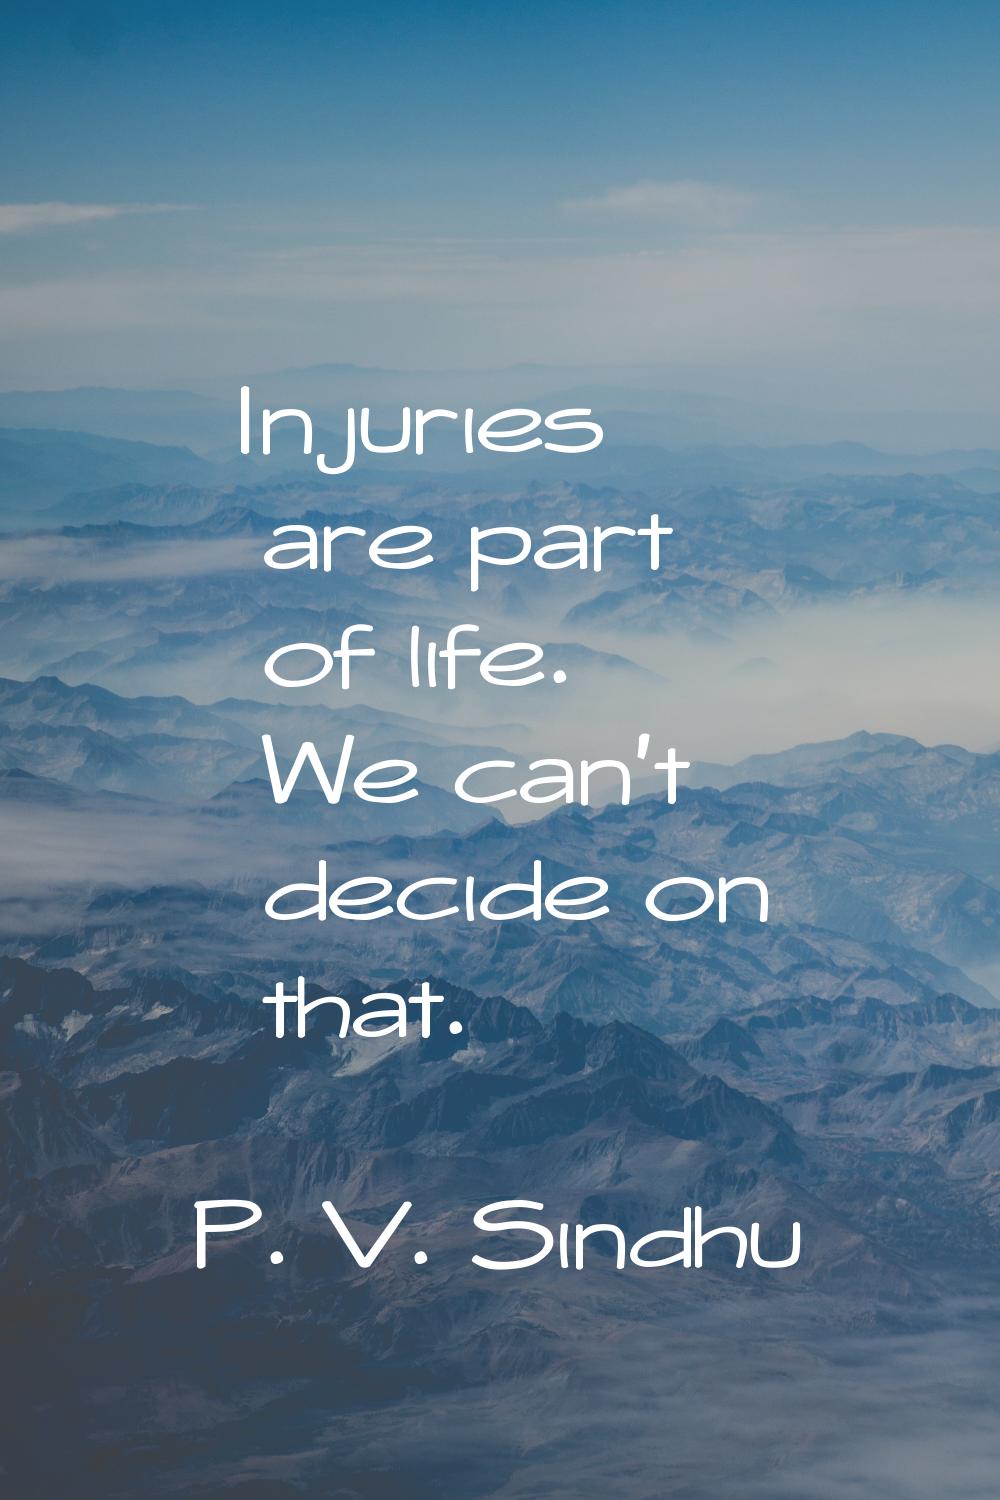 Injuries are part of life. We can't decide on that.